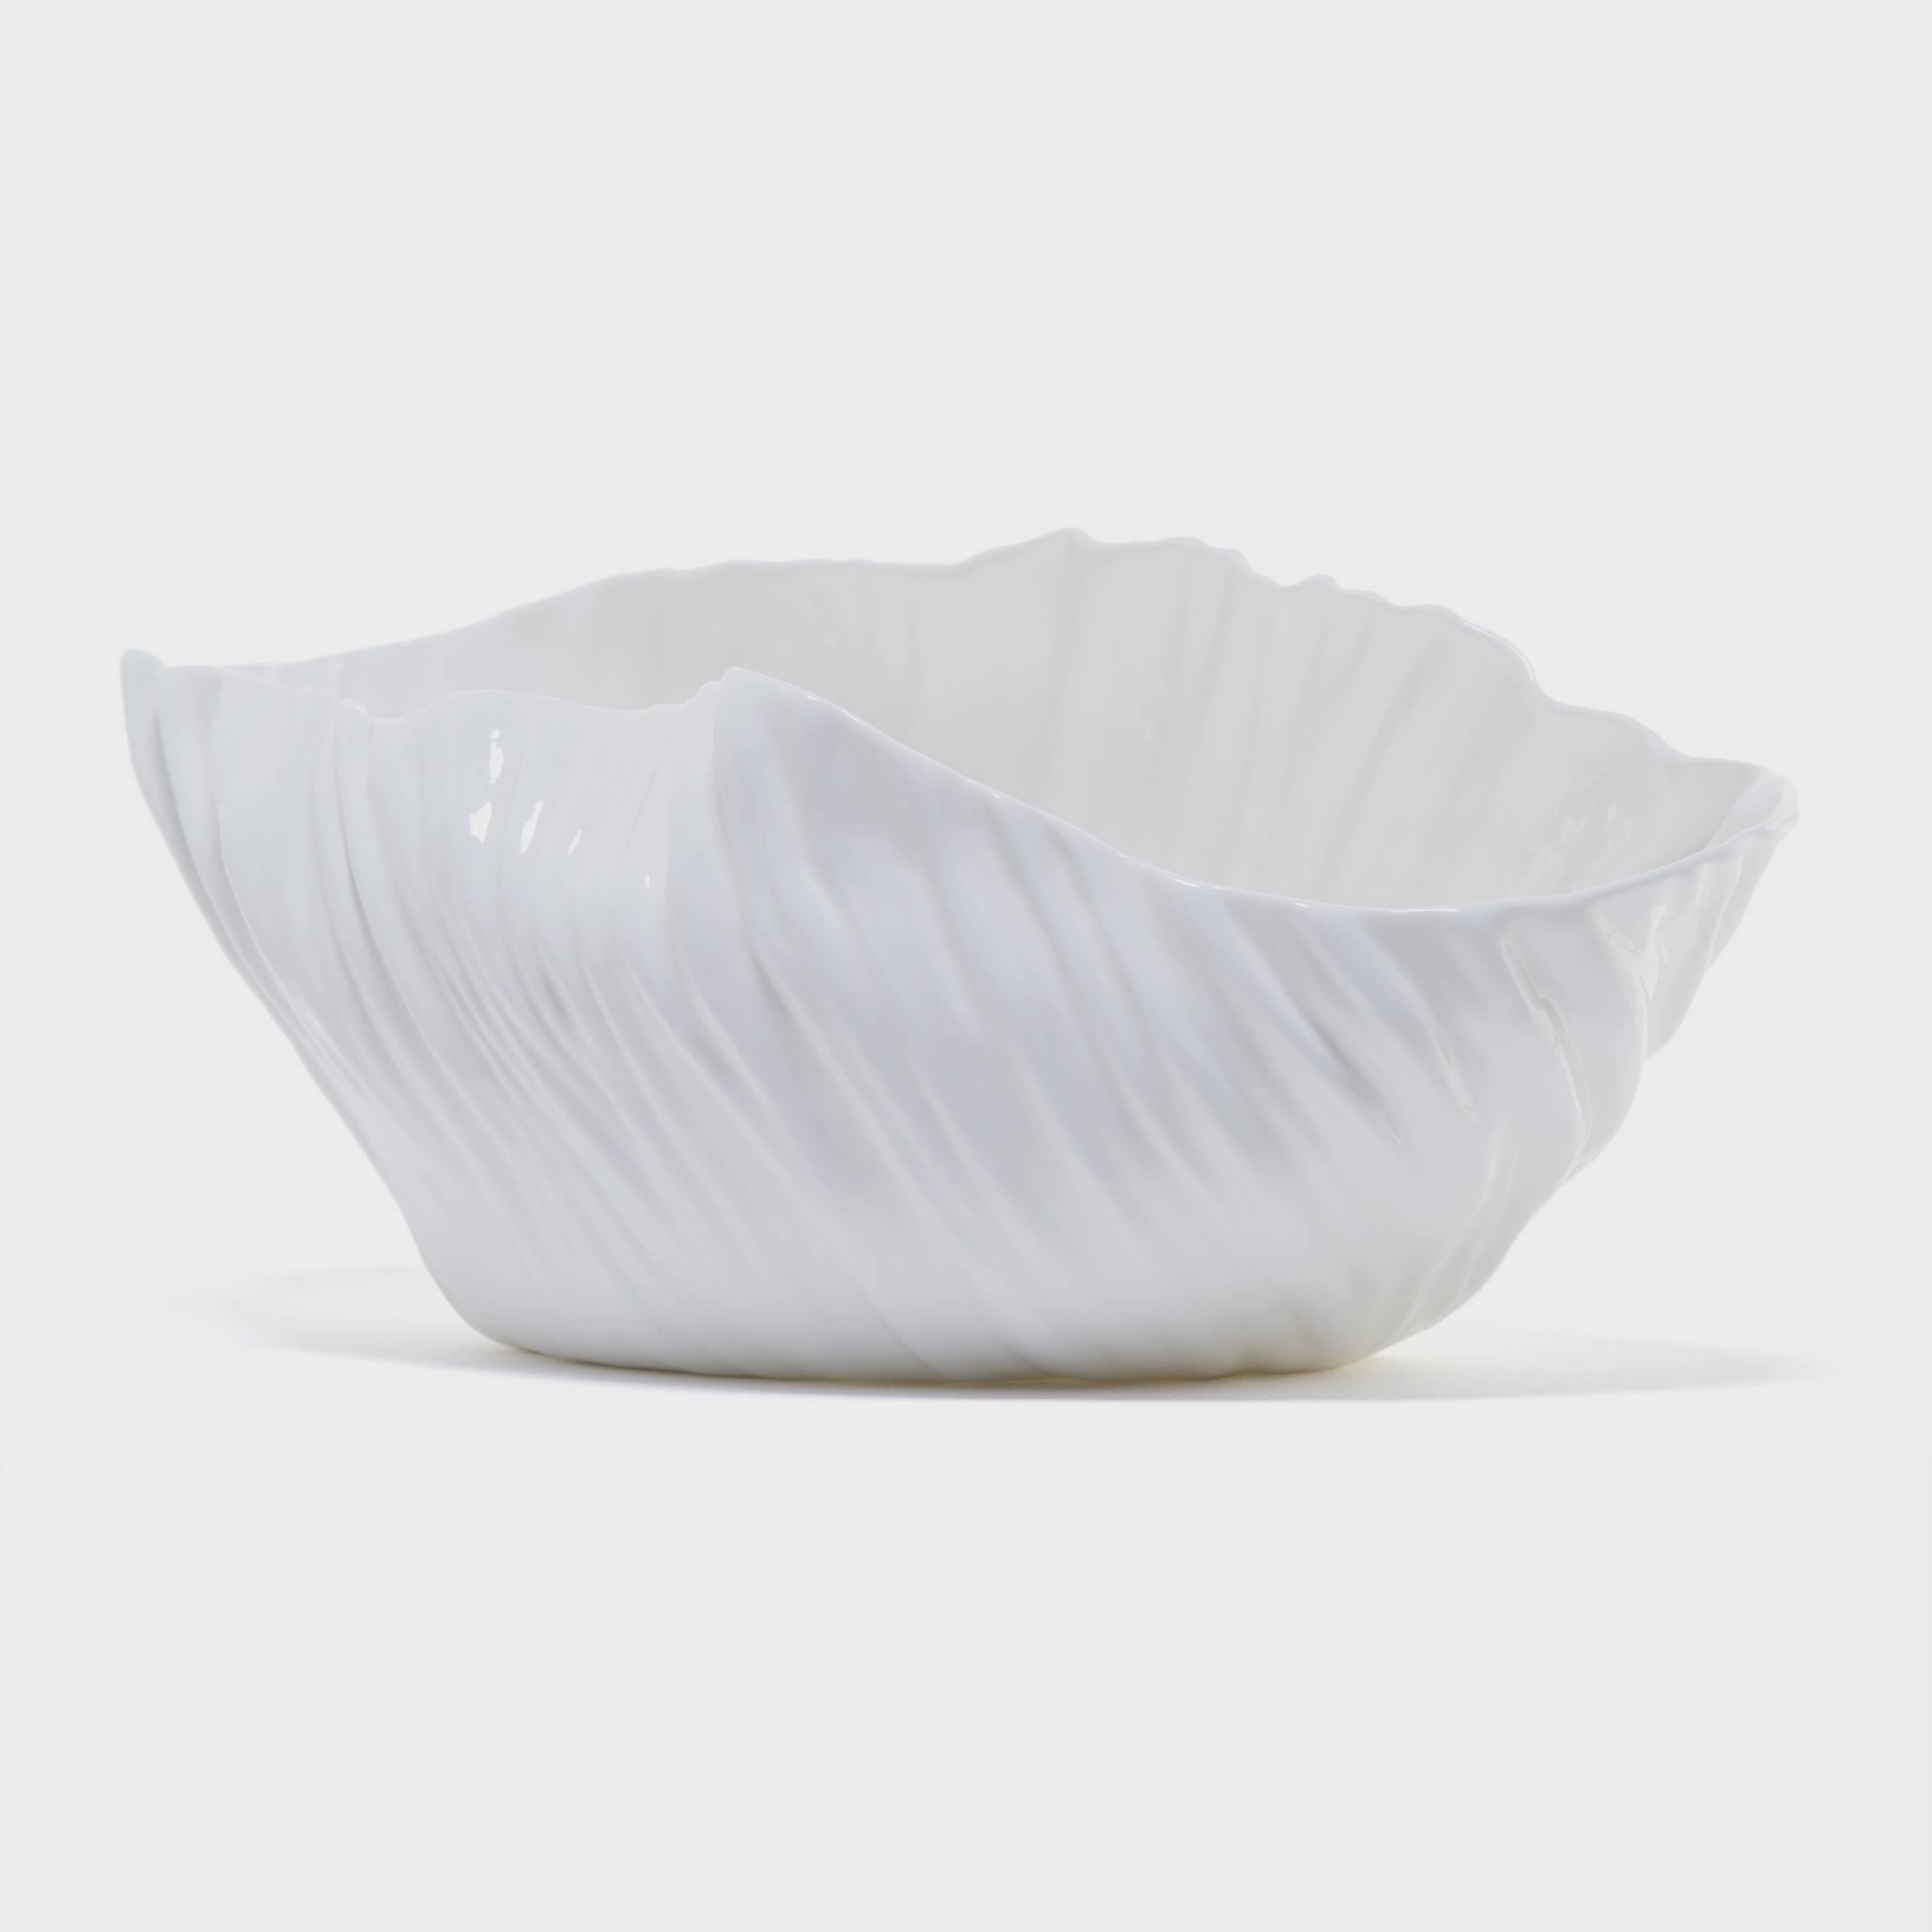 Tapping into a tradition of creating exceptionally Fine porcelain that dates back to the 9th century A.D., Chinese artist Xie Dong has earned international acclaim for her captivating porcelain designs. Intrigued by all that is formless or ephemeral